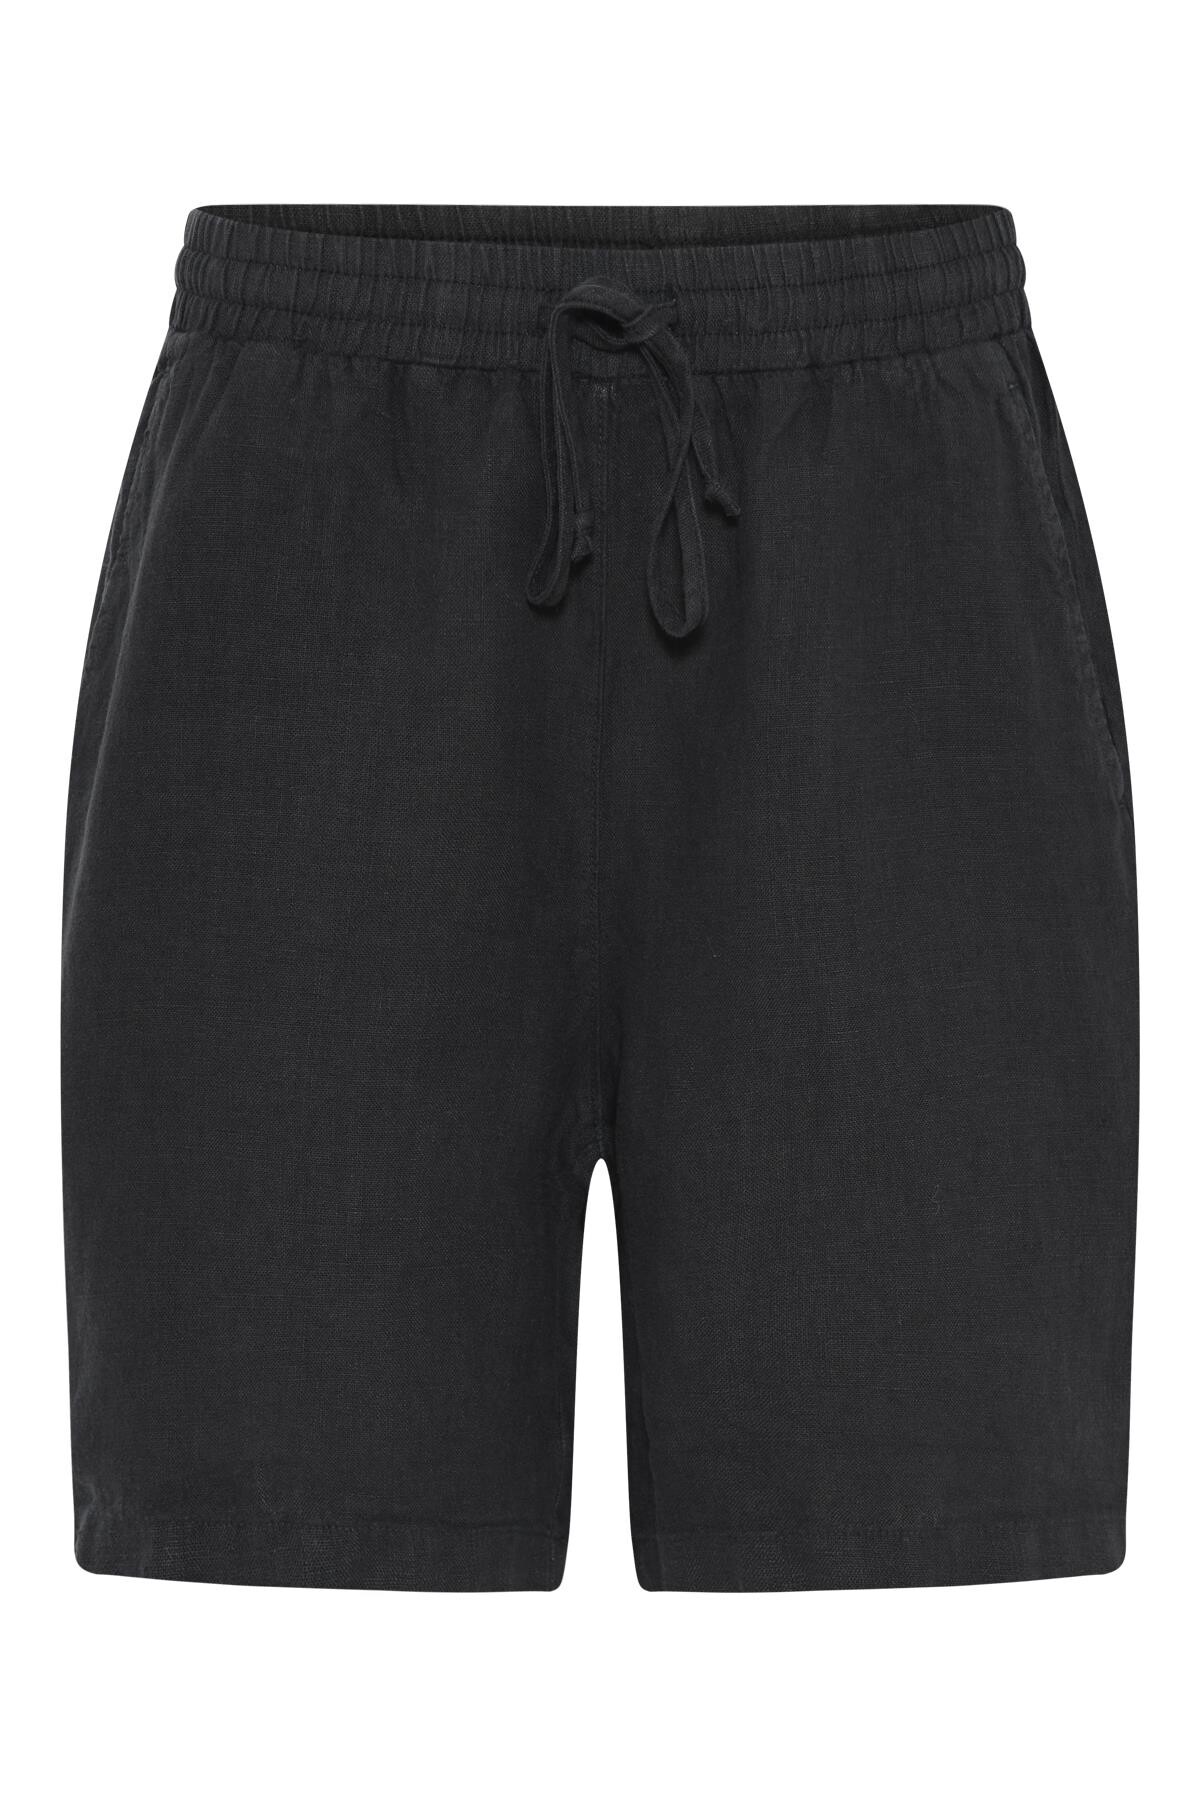 IN FRONT LINO SHORTS 16229 999 (Black 999)